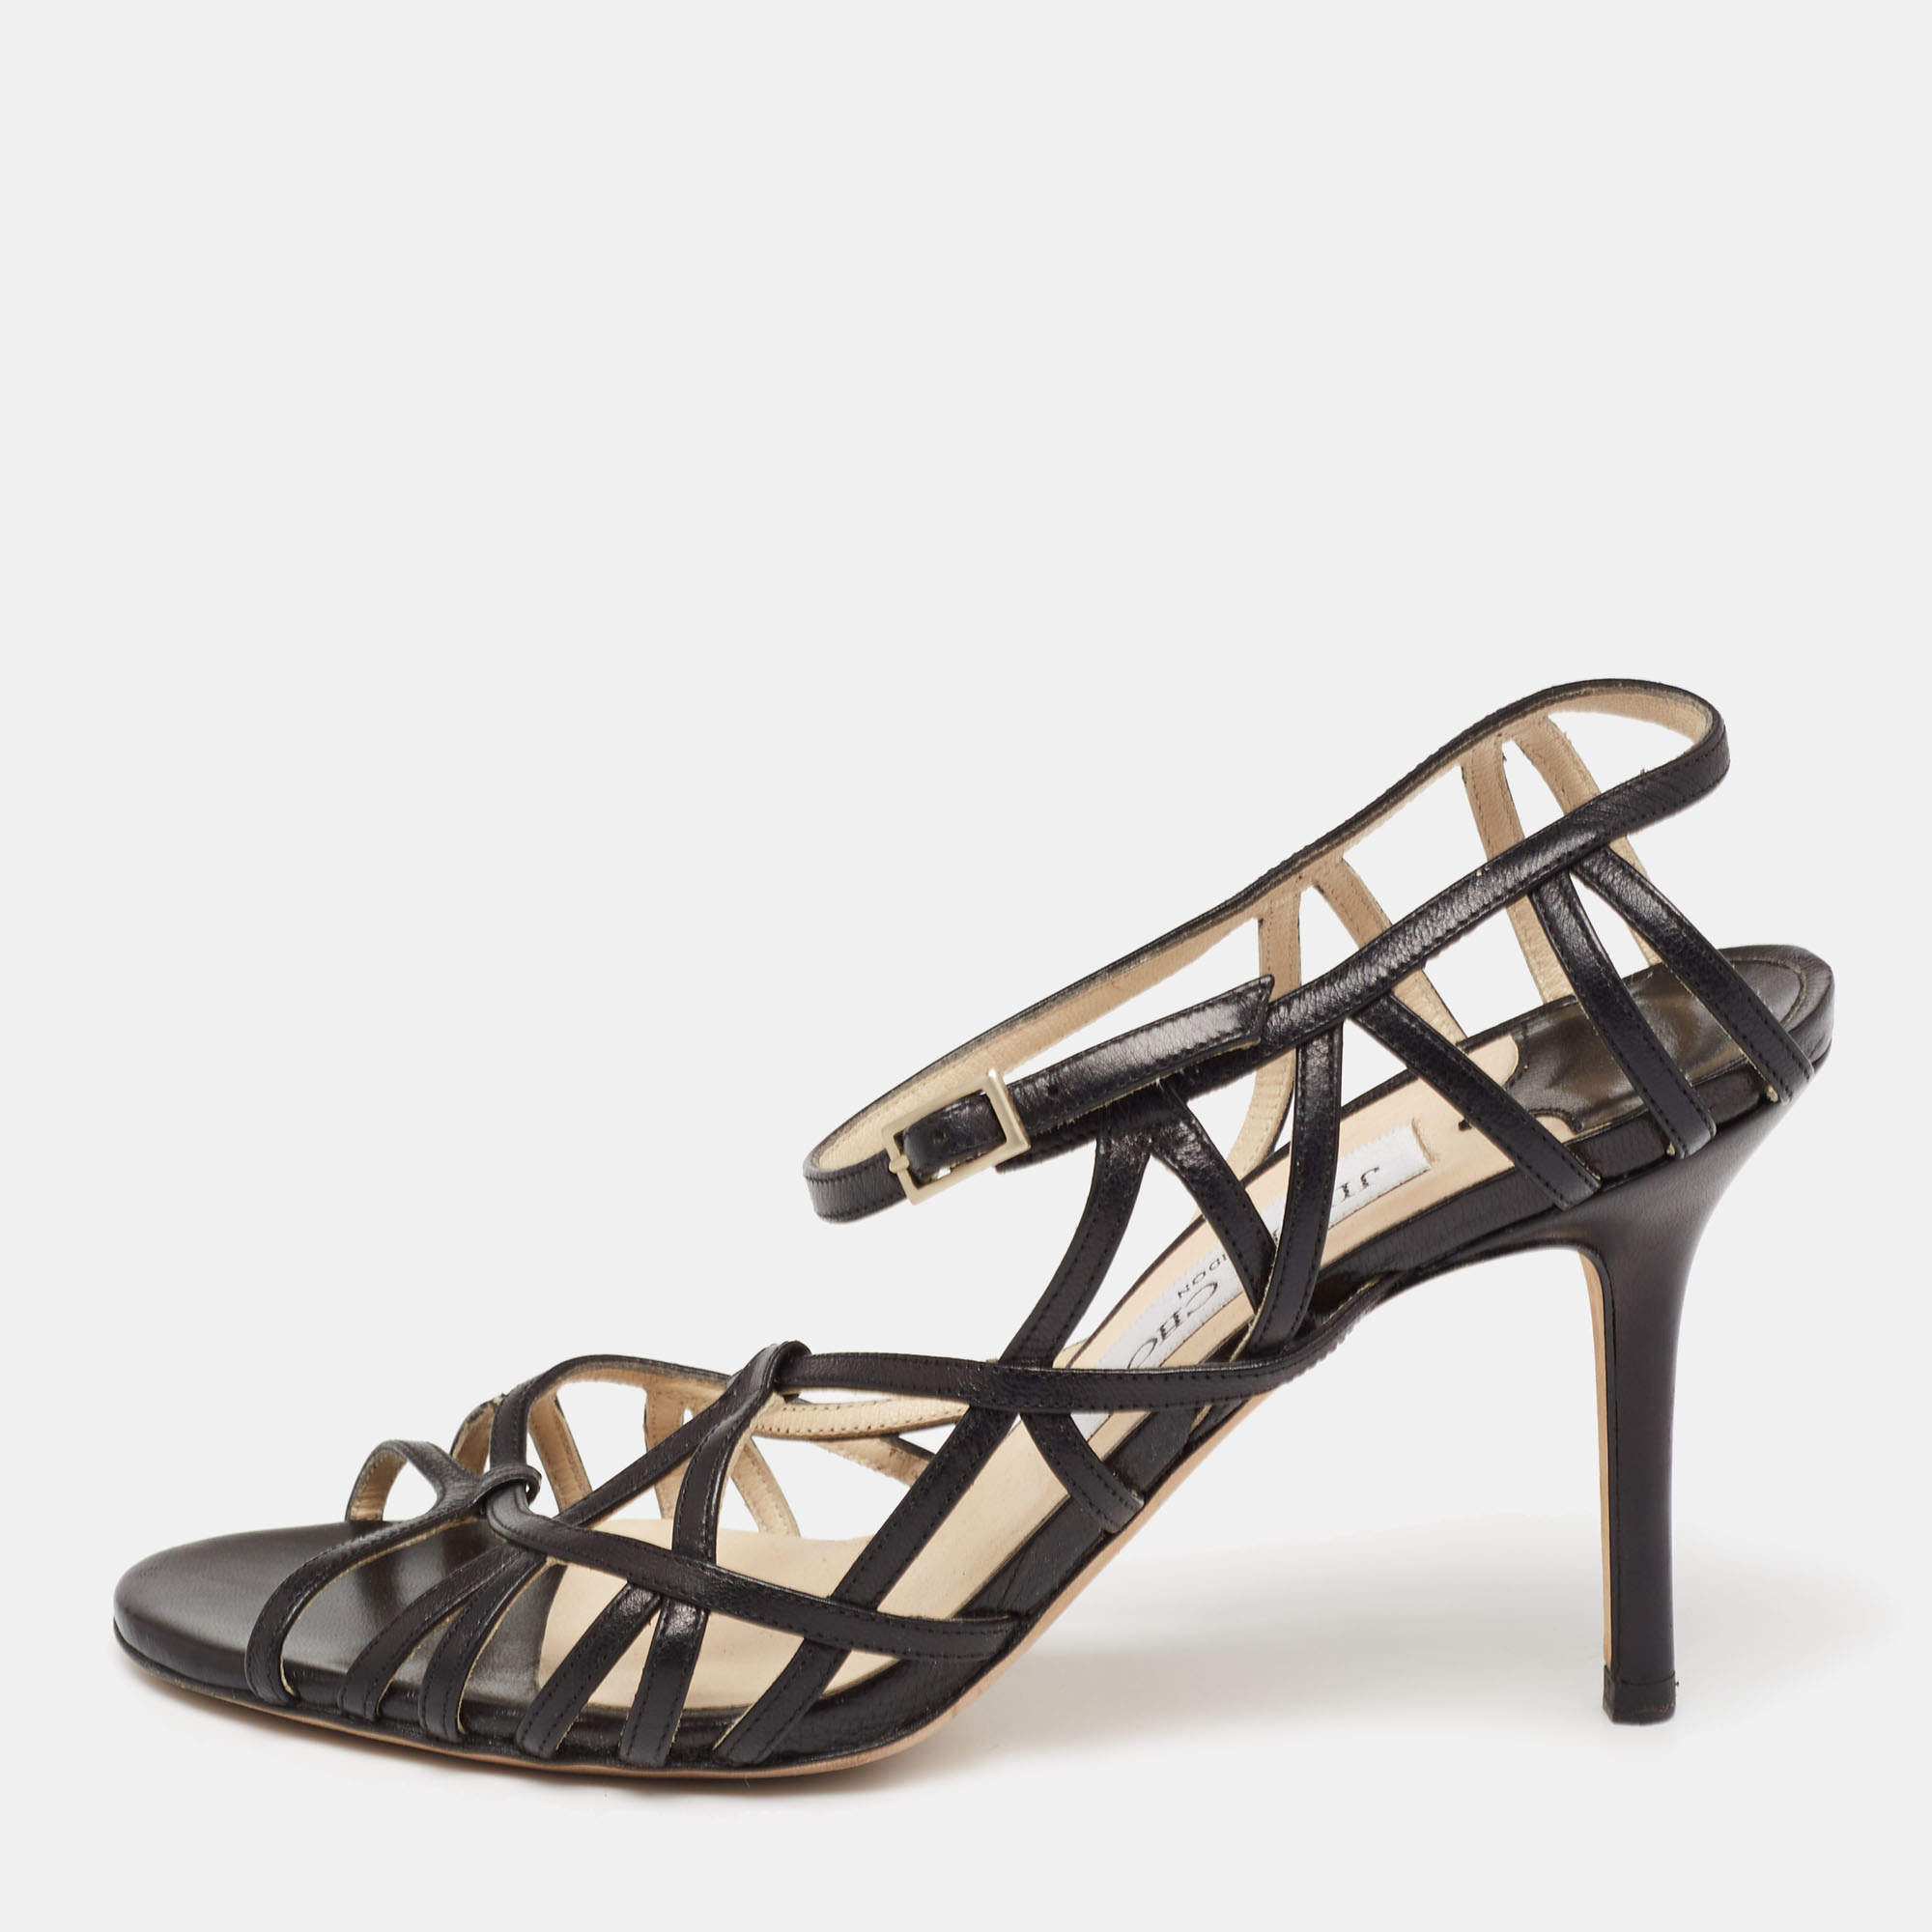 Jimmy Choo Black Leather Strappy Sandals Size 36.5